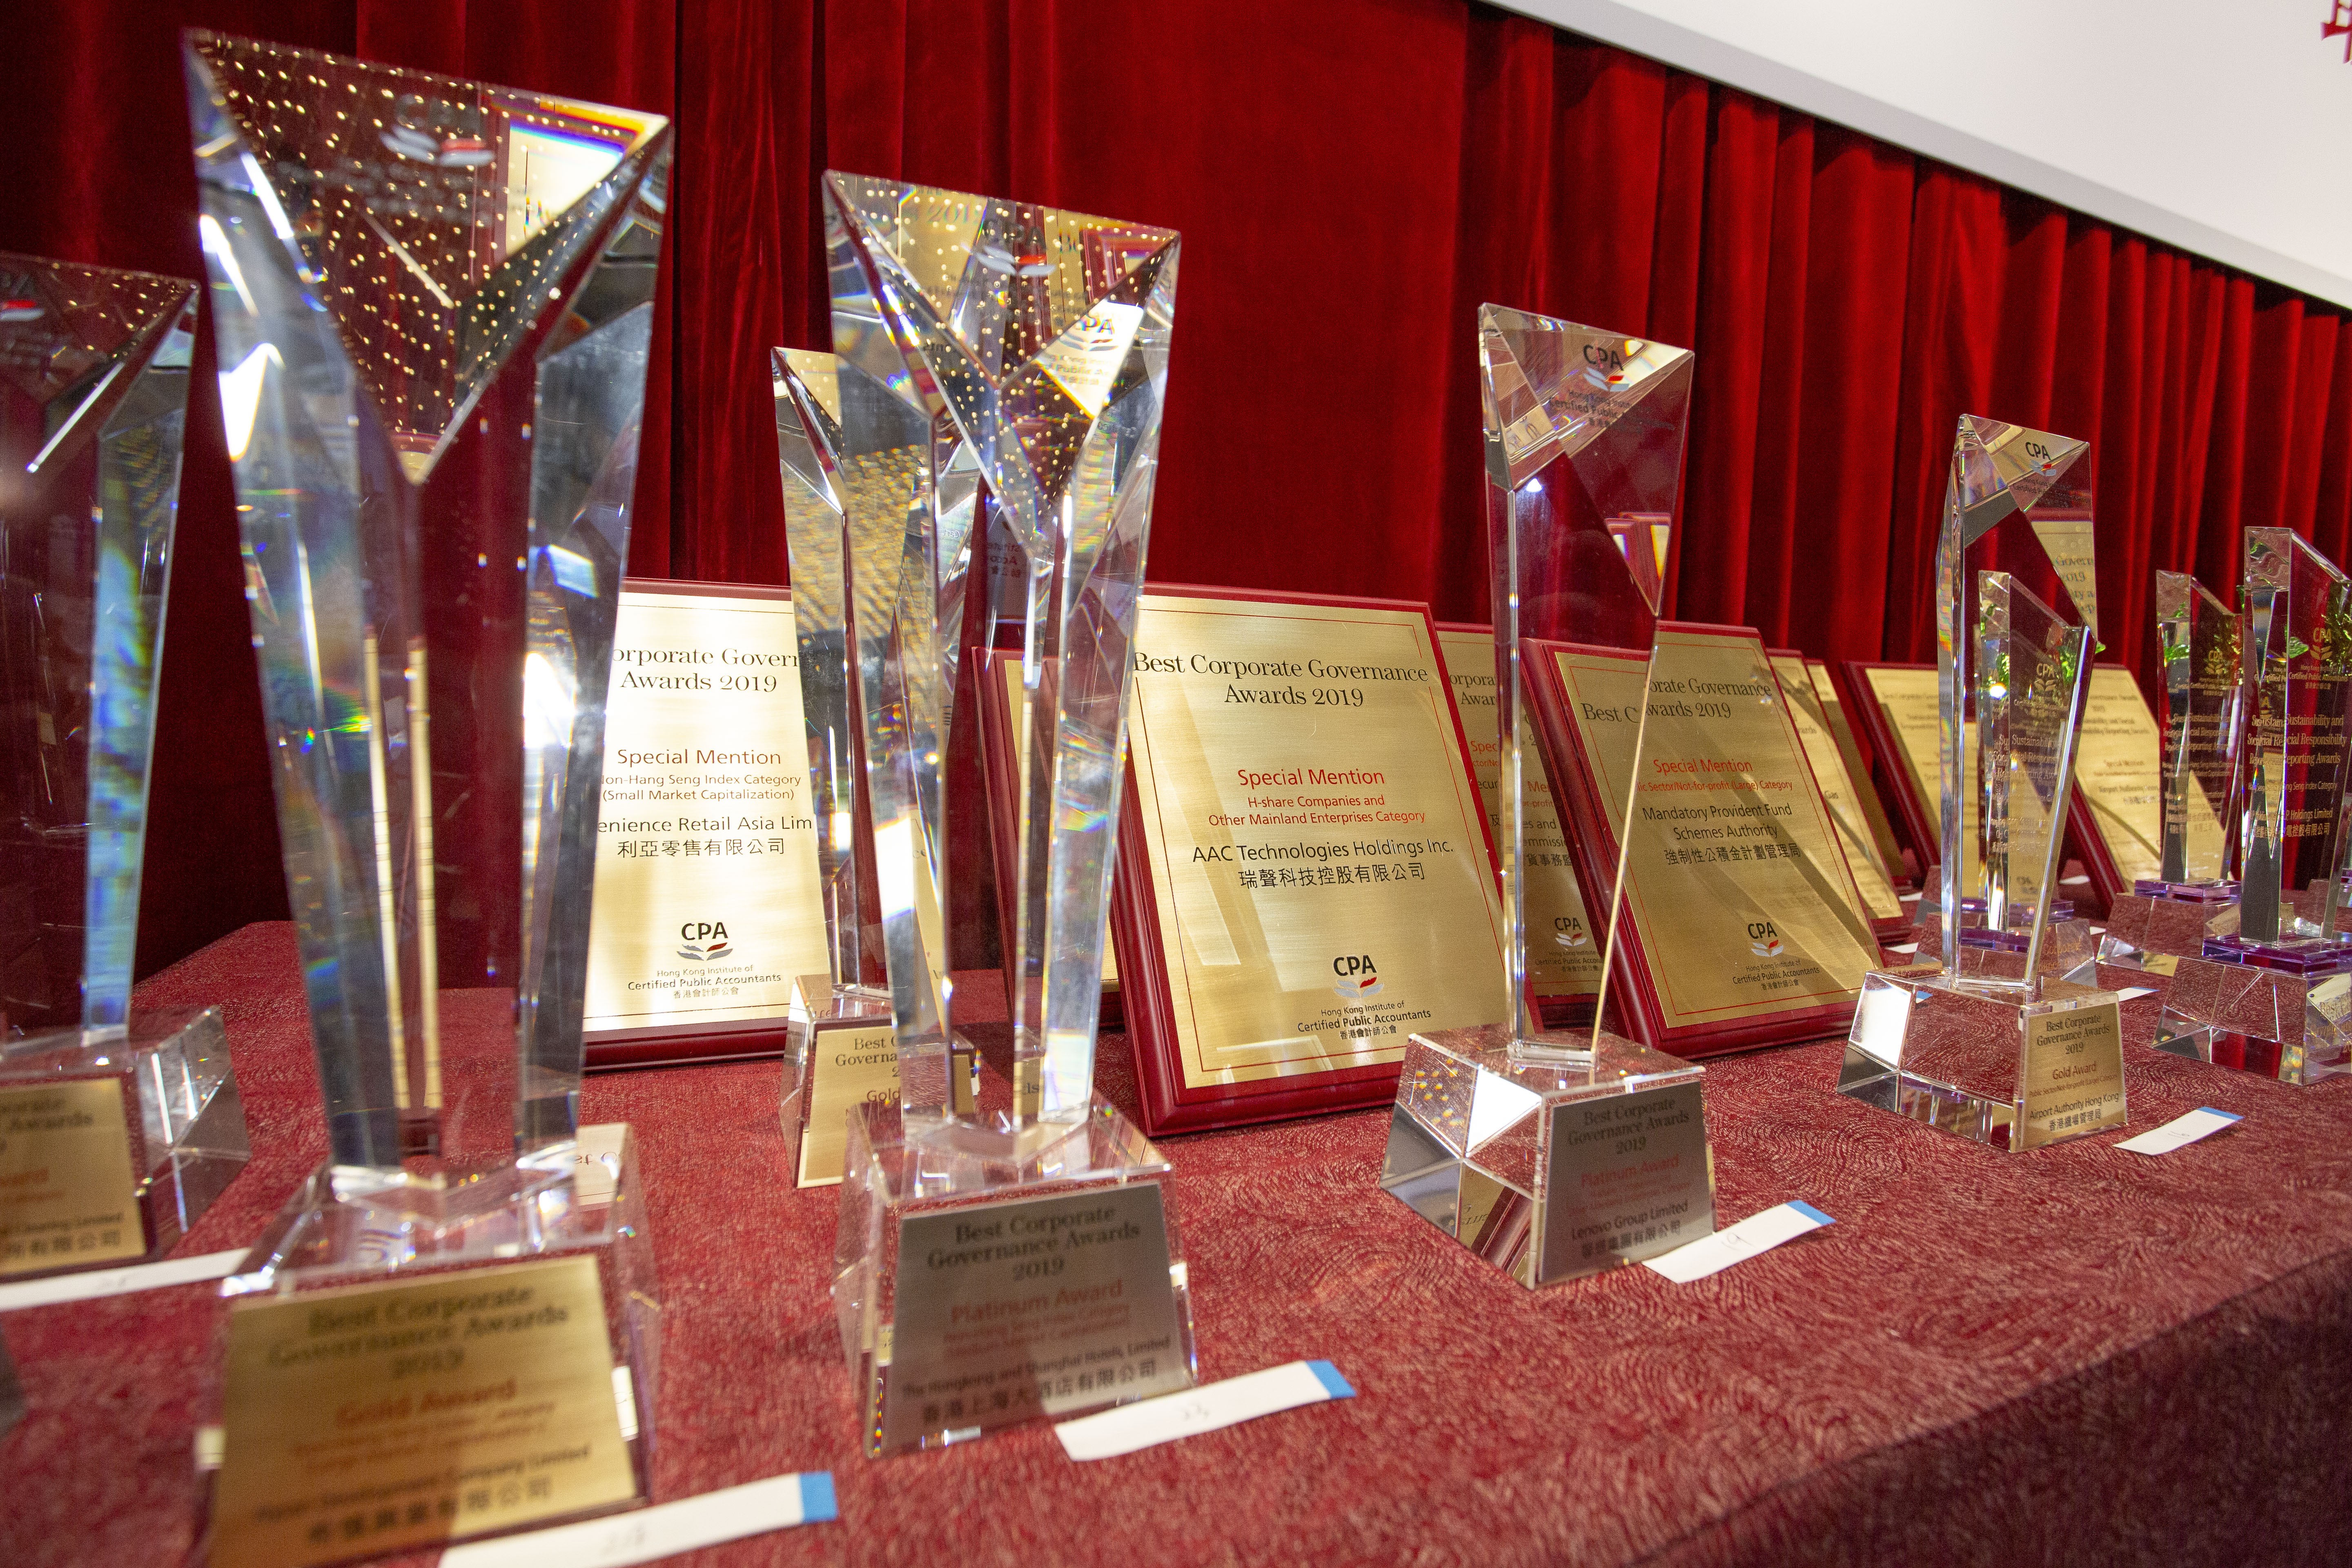 Judges presented 26 awards to Hong Kong companies and organisations for their commitment to the highest corporate governance standards at the Best Corporate Governance Awards 2019 hosted by the Hong Kong Institute of Certified Public Accountants. Photo: Frank Chan